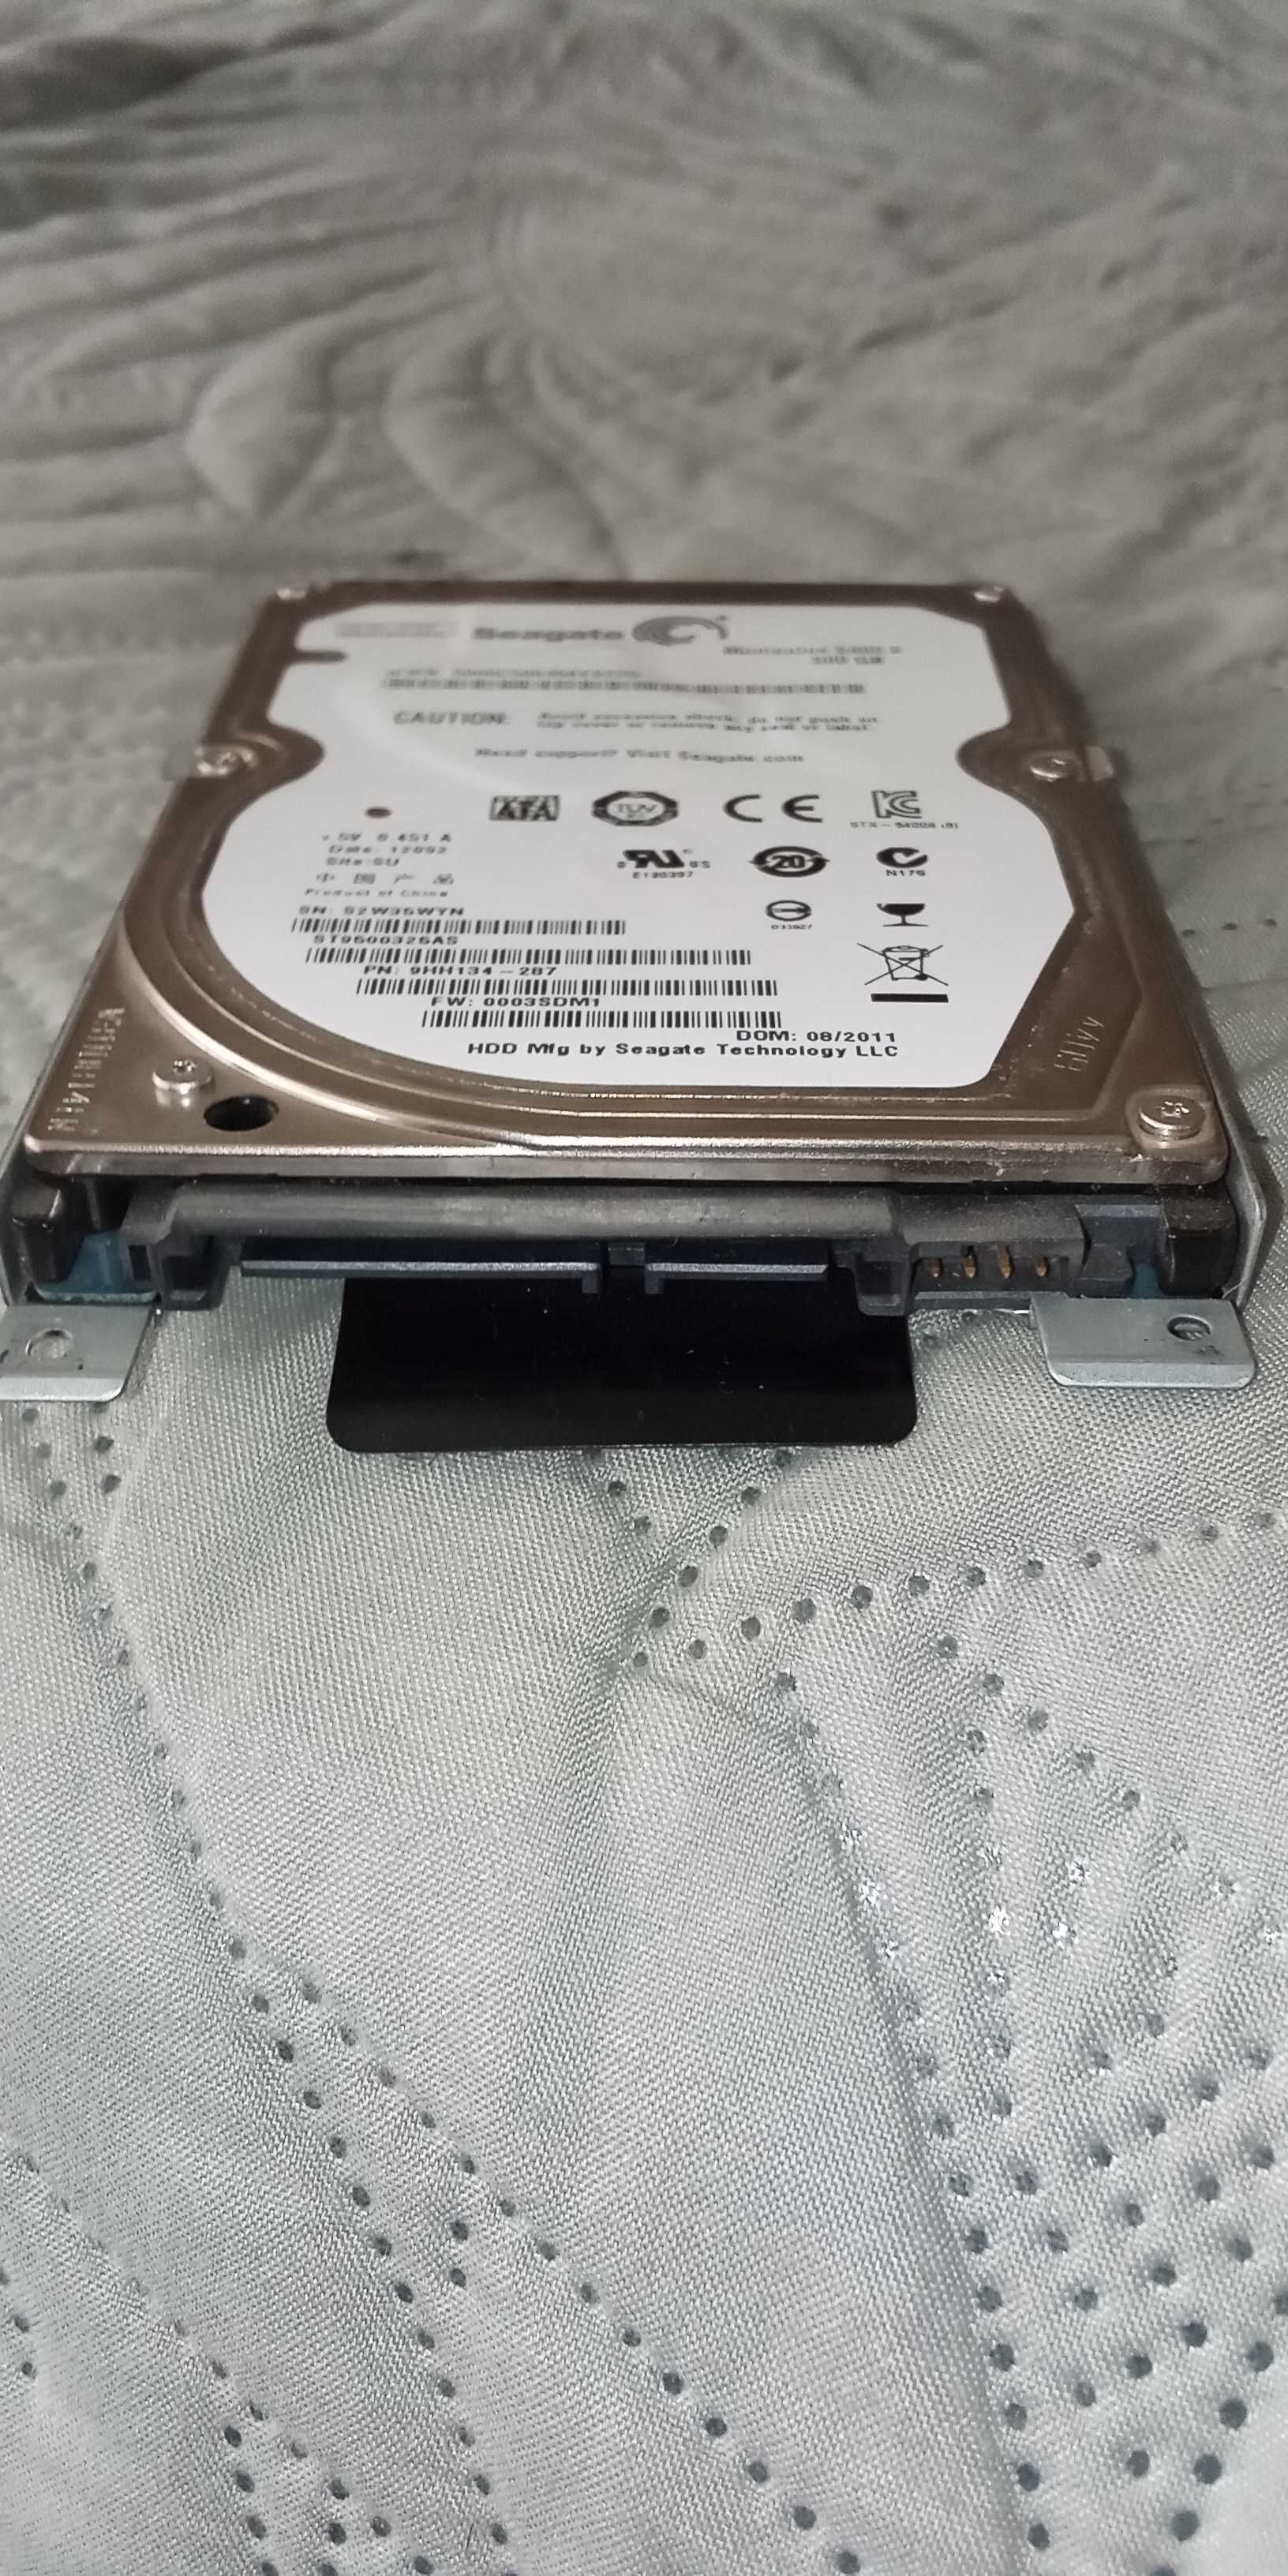 hdd 500GB Laptop defect!